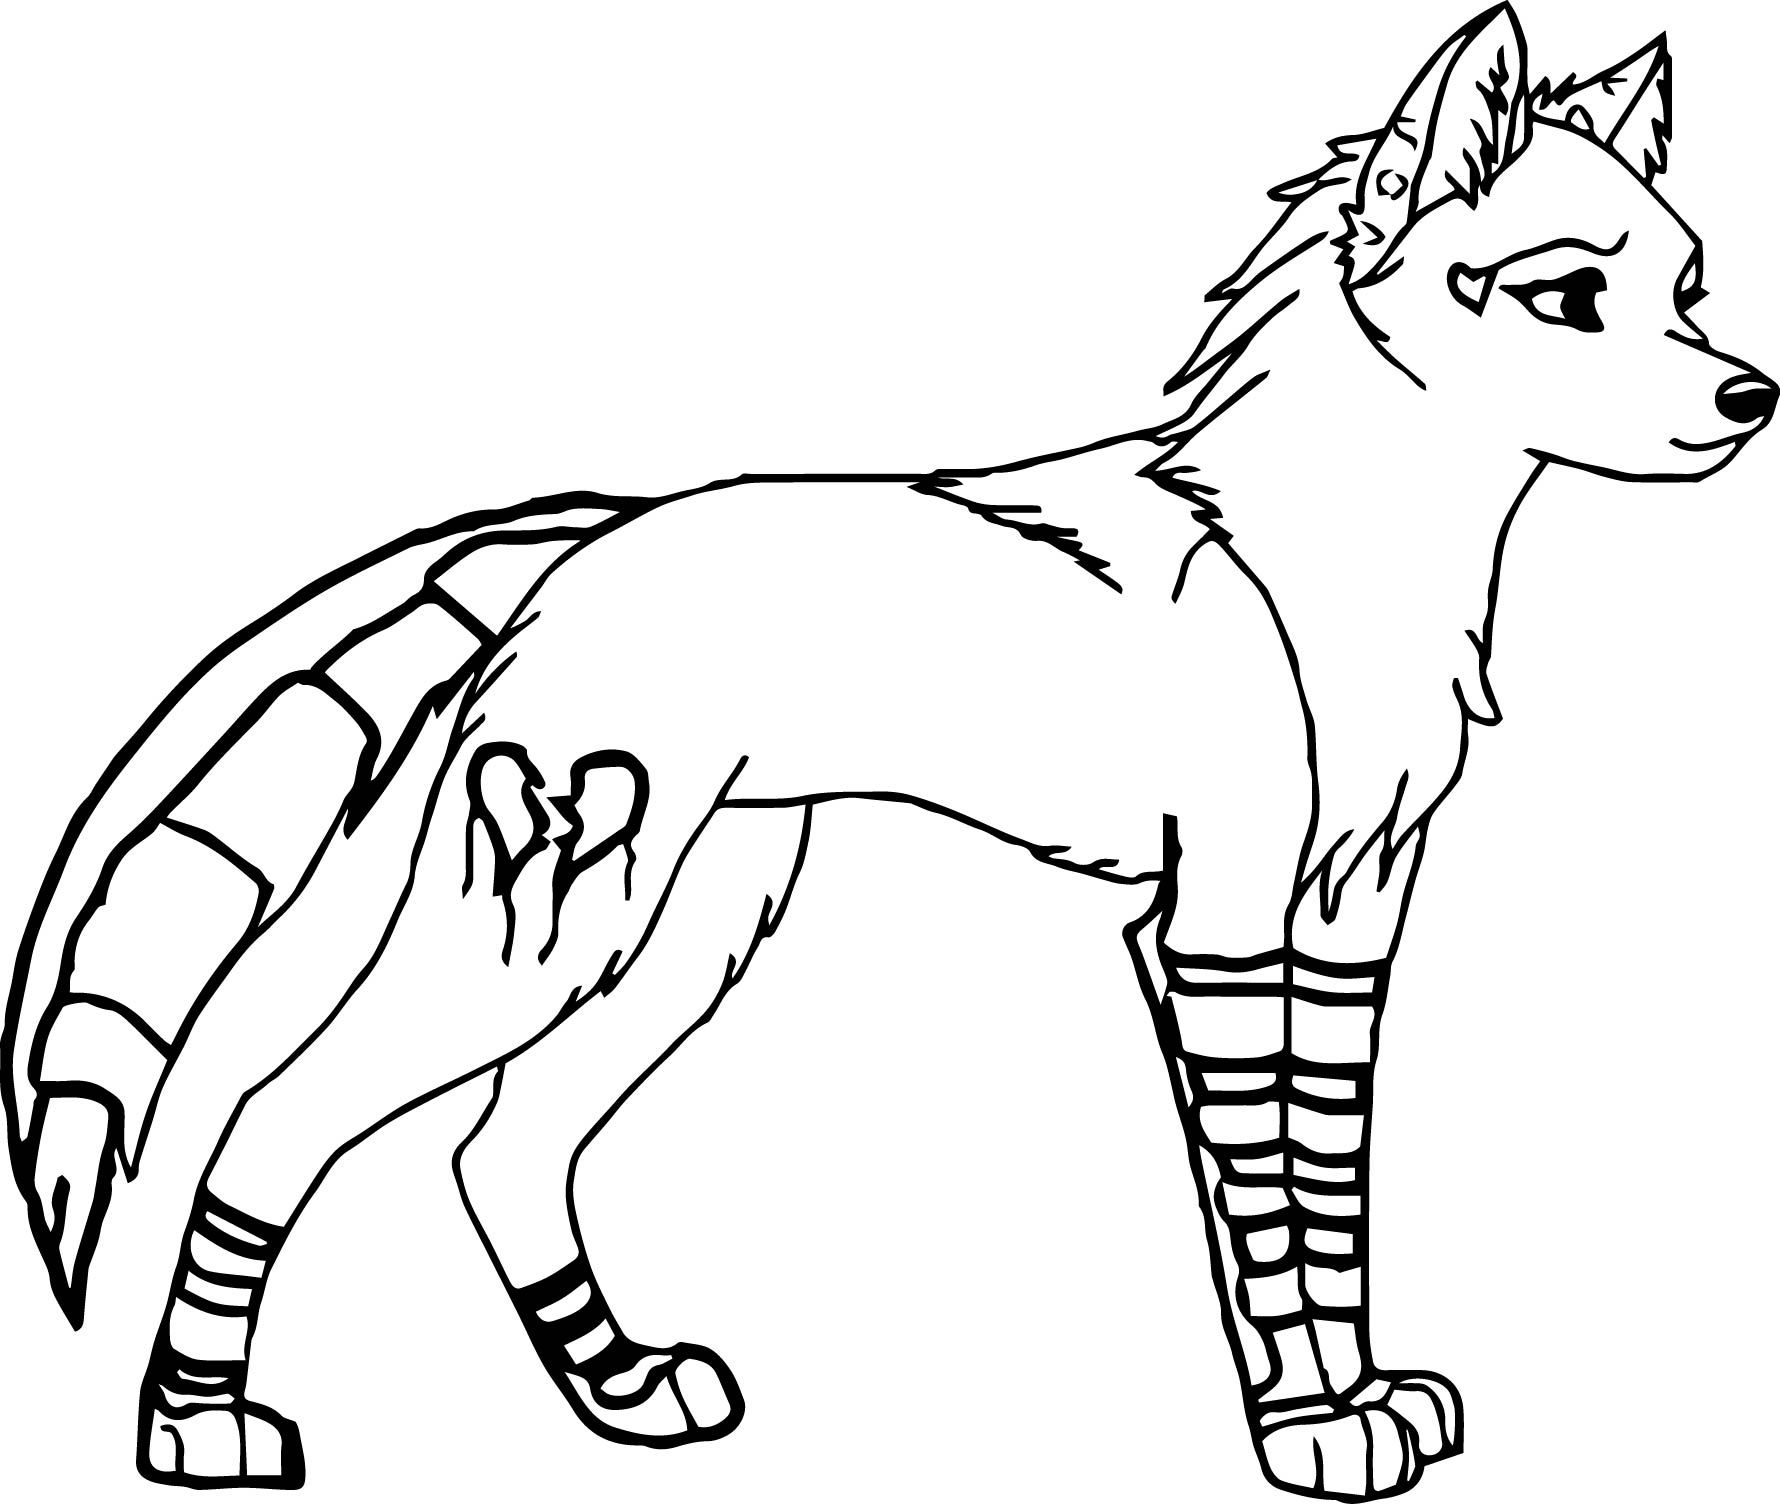 Wolf Link Coloring Pages at GetDrawings Free download